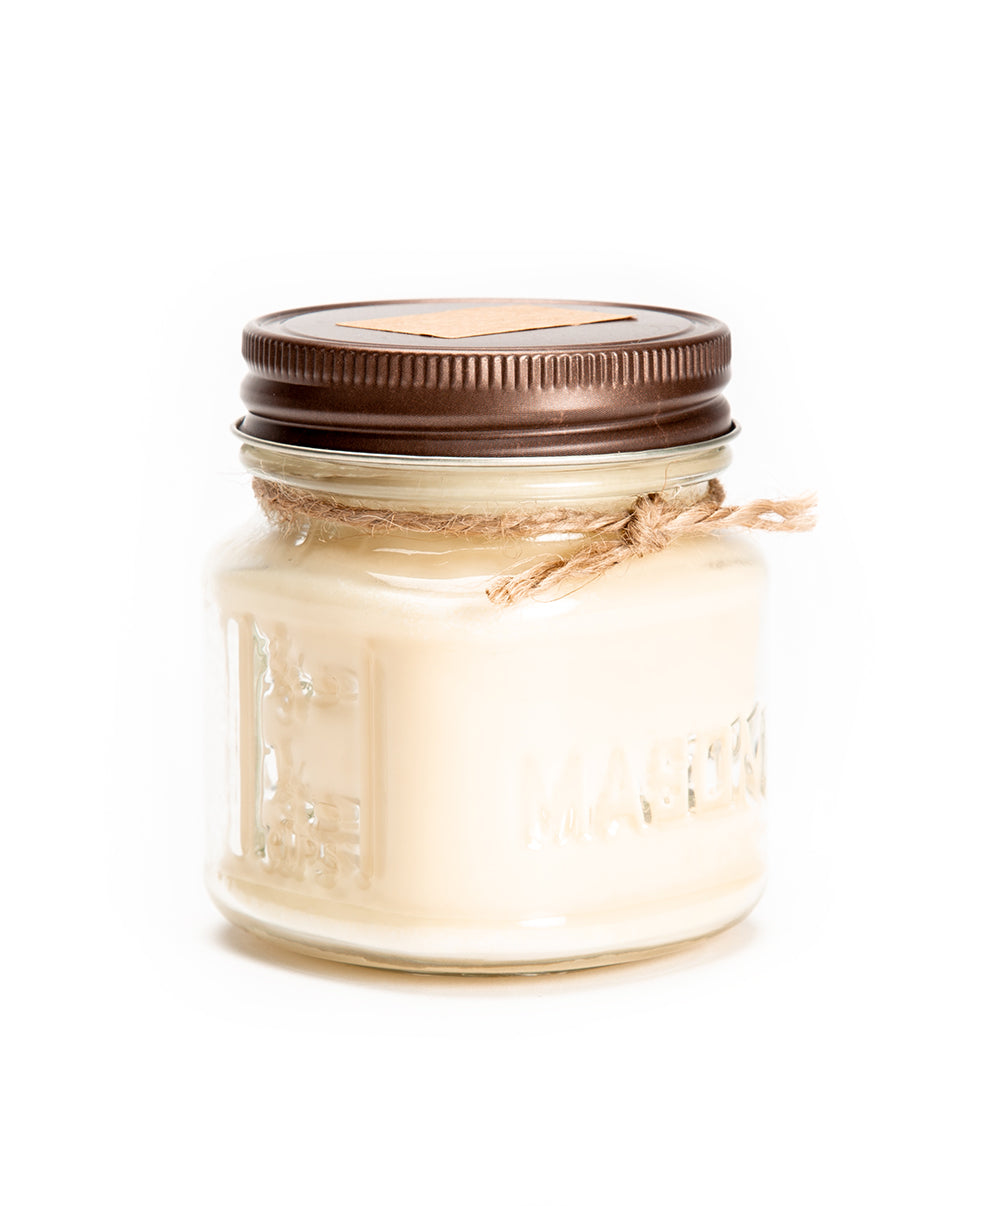 SUMMER SHANDY SOY CANDLE